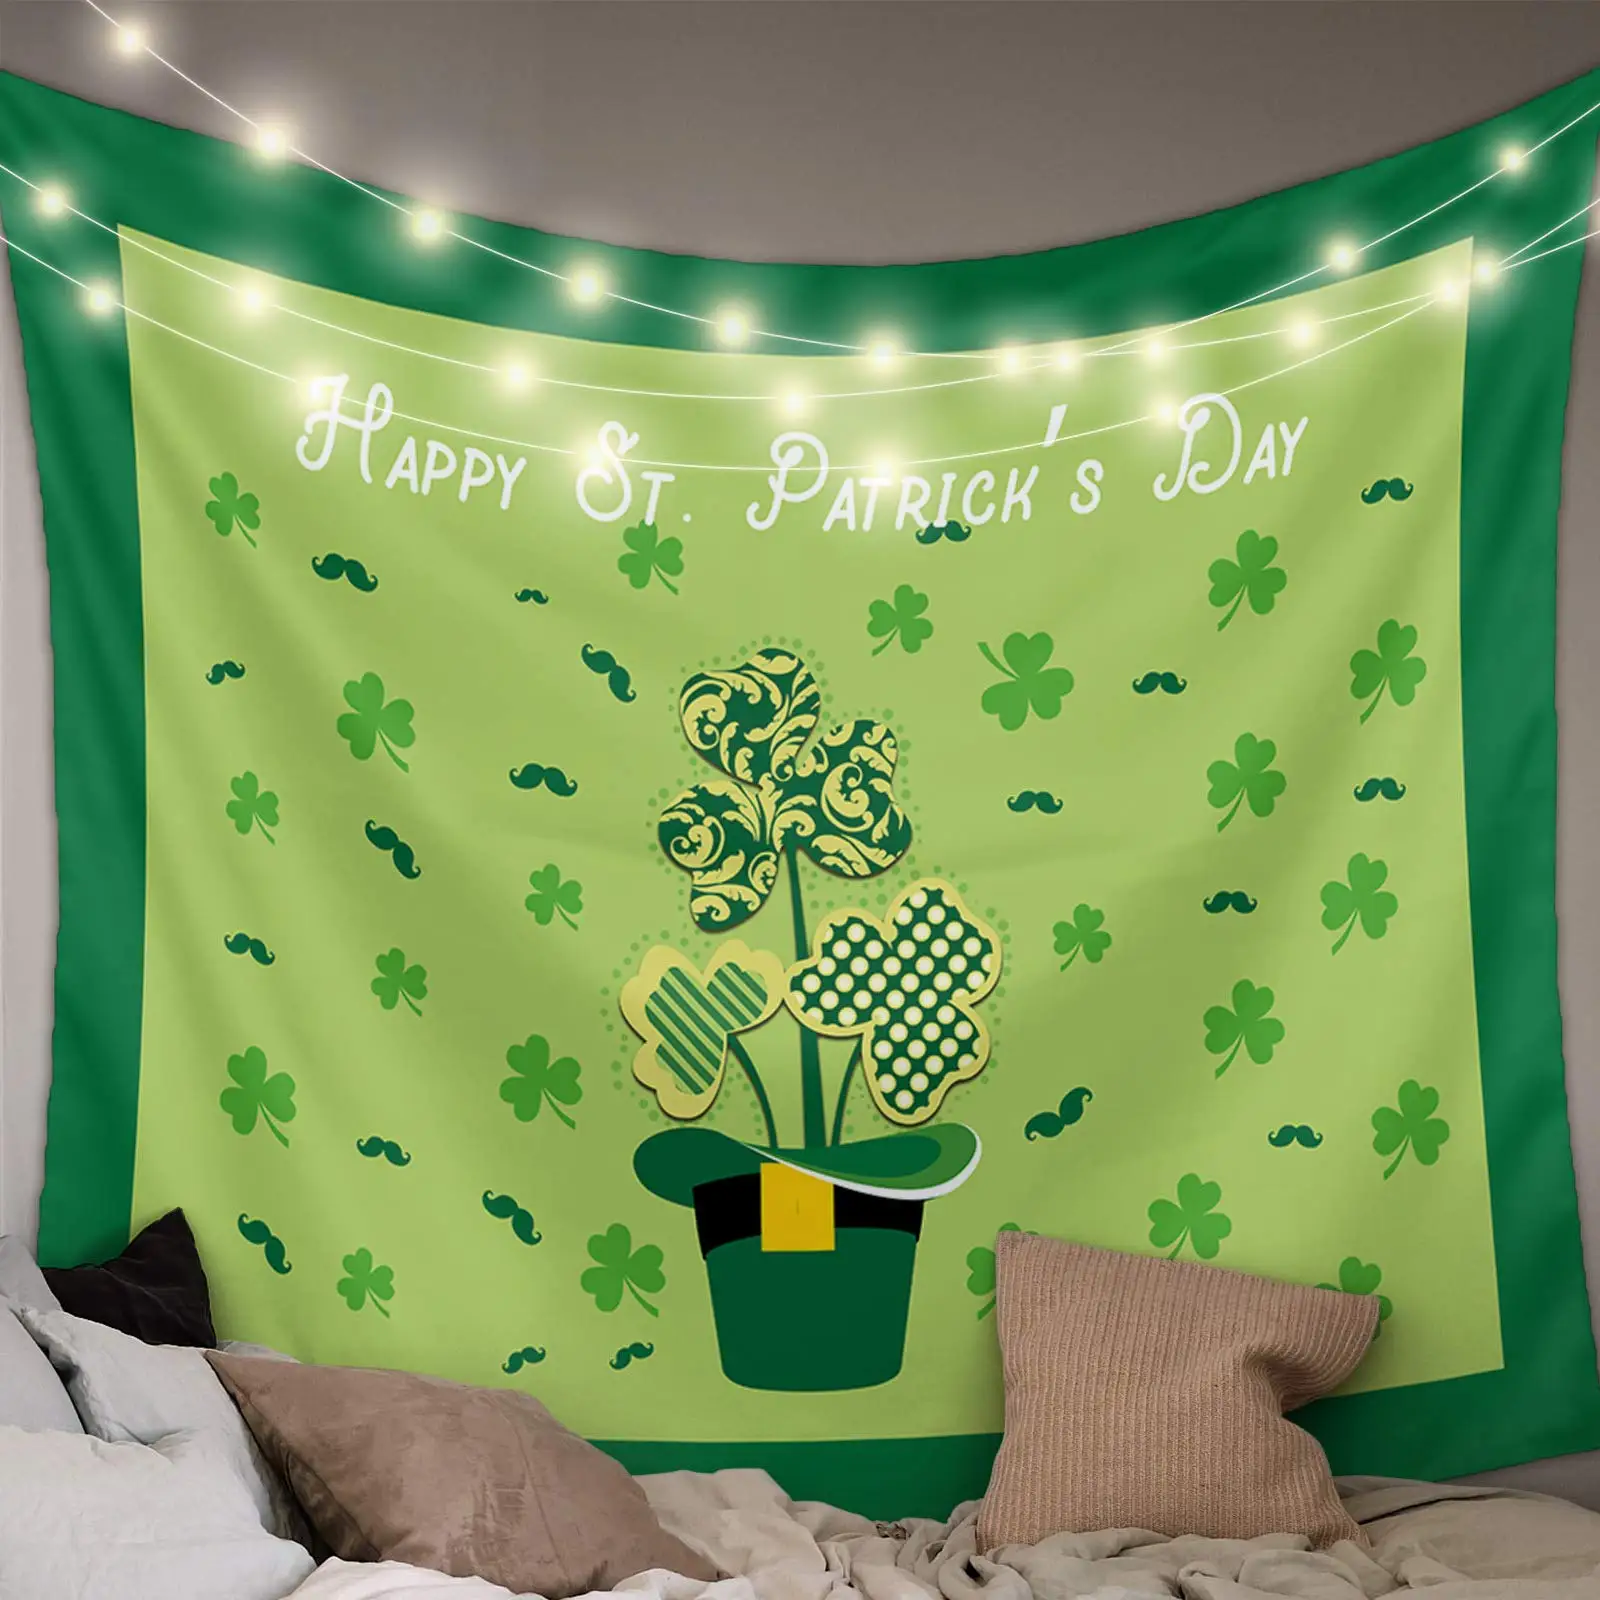 

Happy St Patrick's Day Clover Party Tapestry Green Shamrock Tapestry Wall Hanging Art for Bedroom Living Room Dorm Home Decor